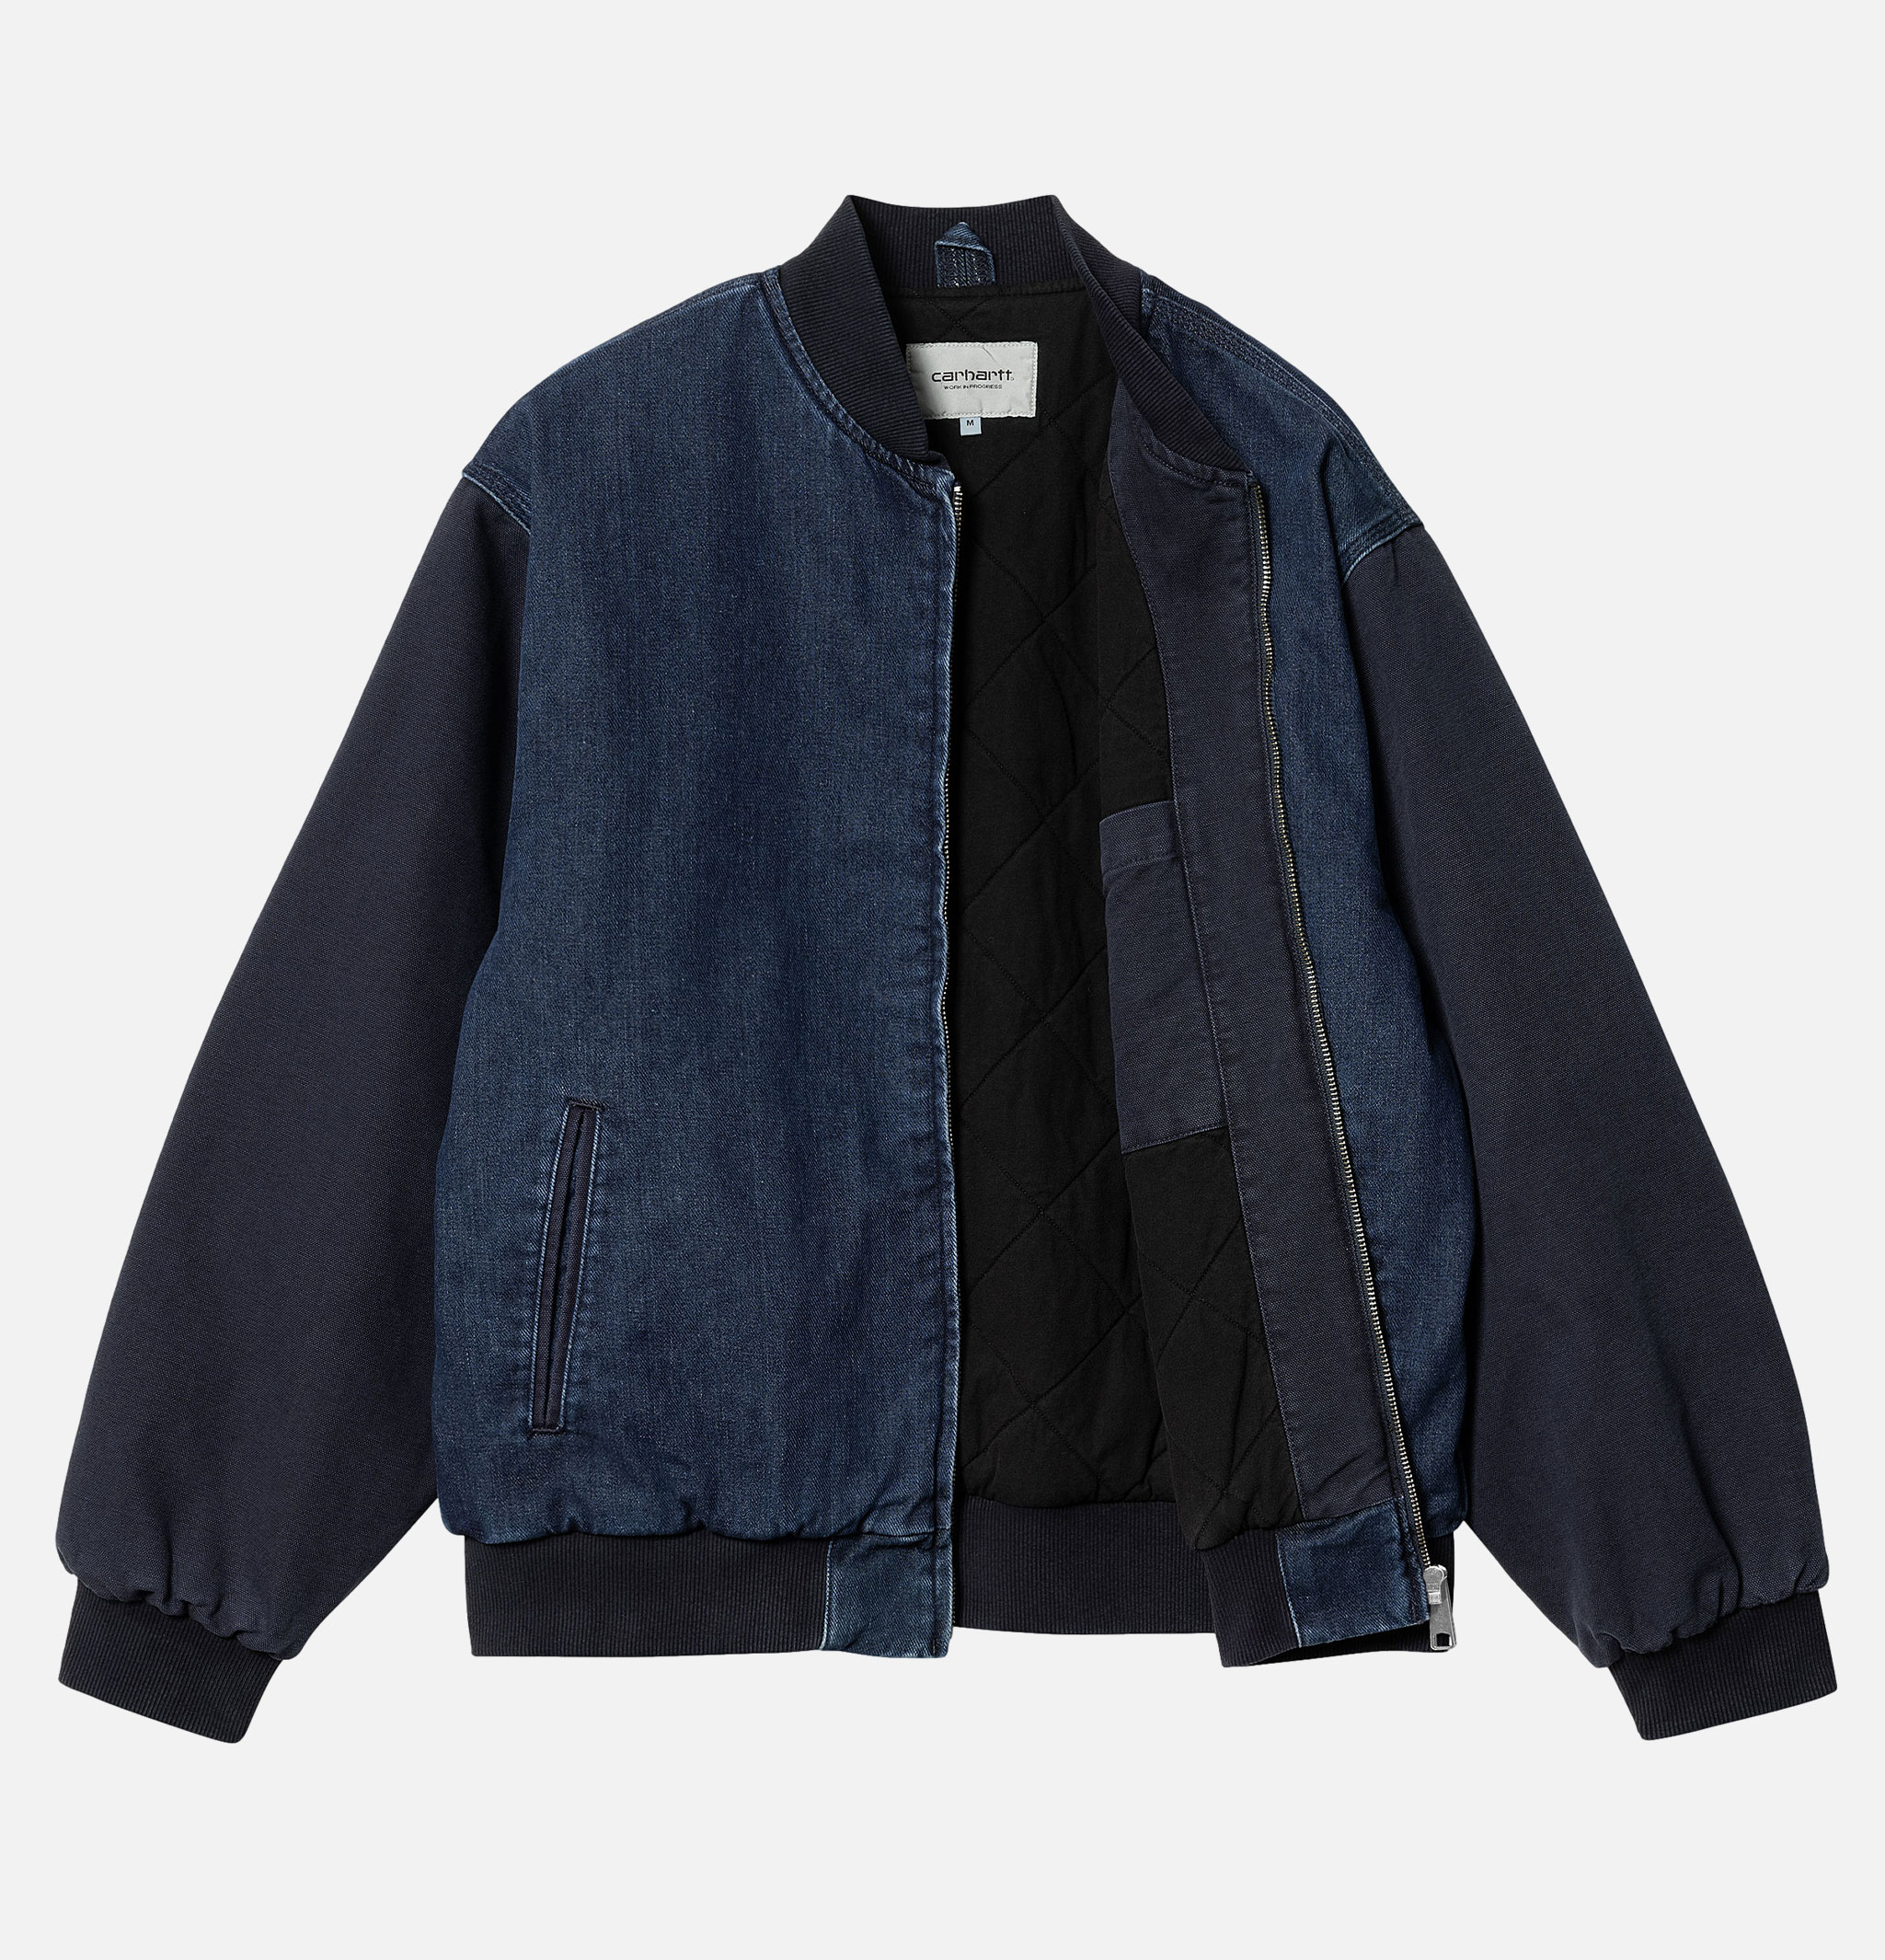 Carhartt WIP Paxon Bomber Navy Stone Washed